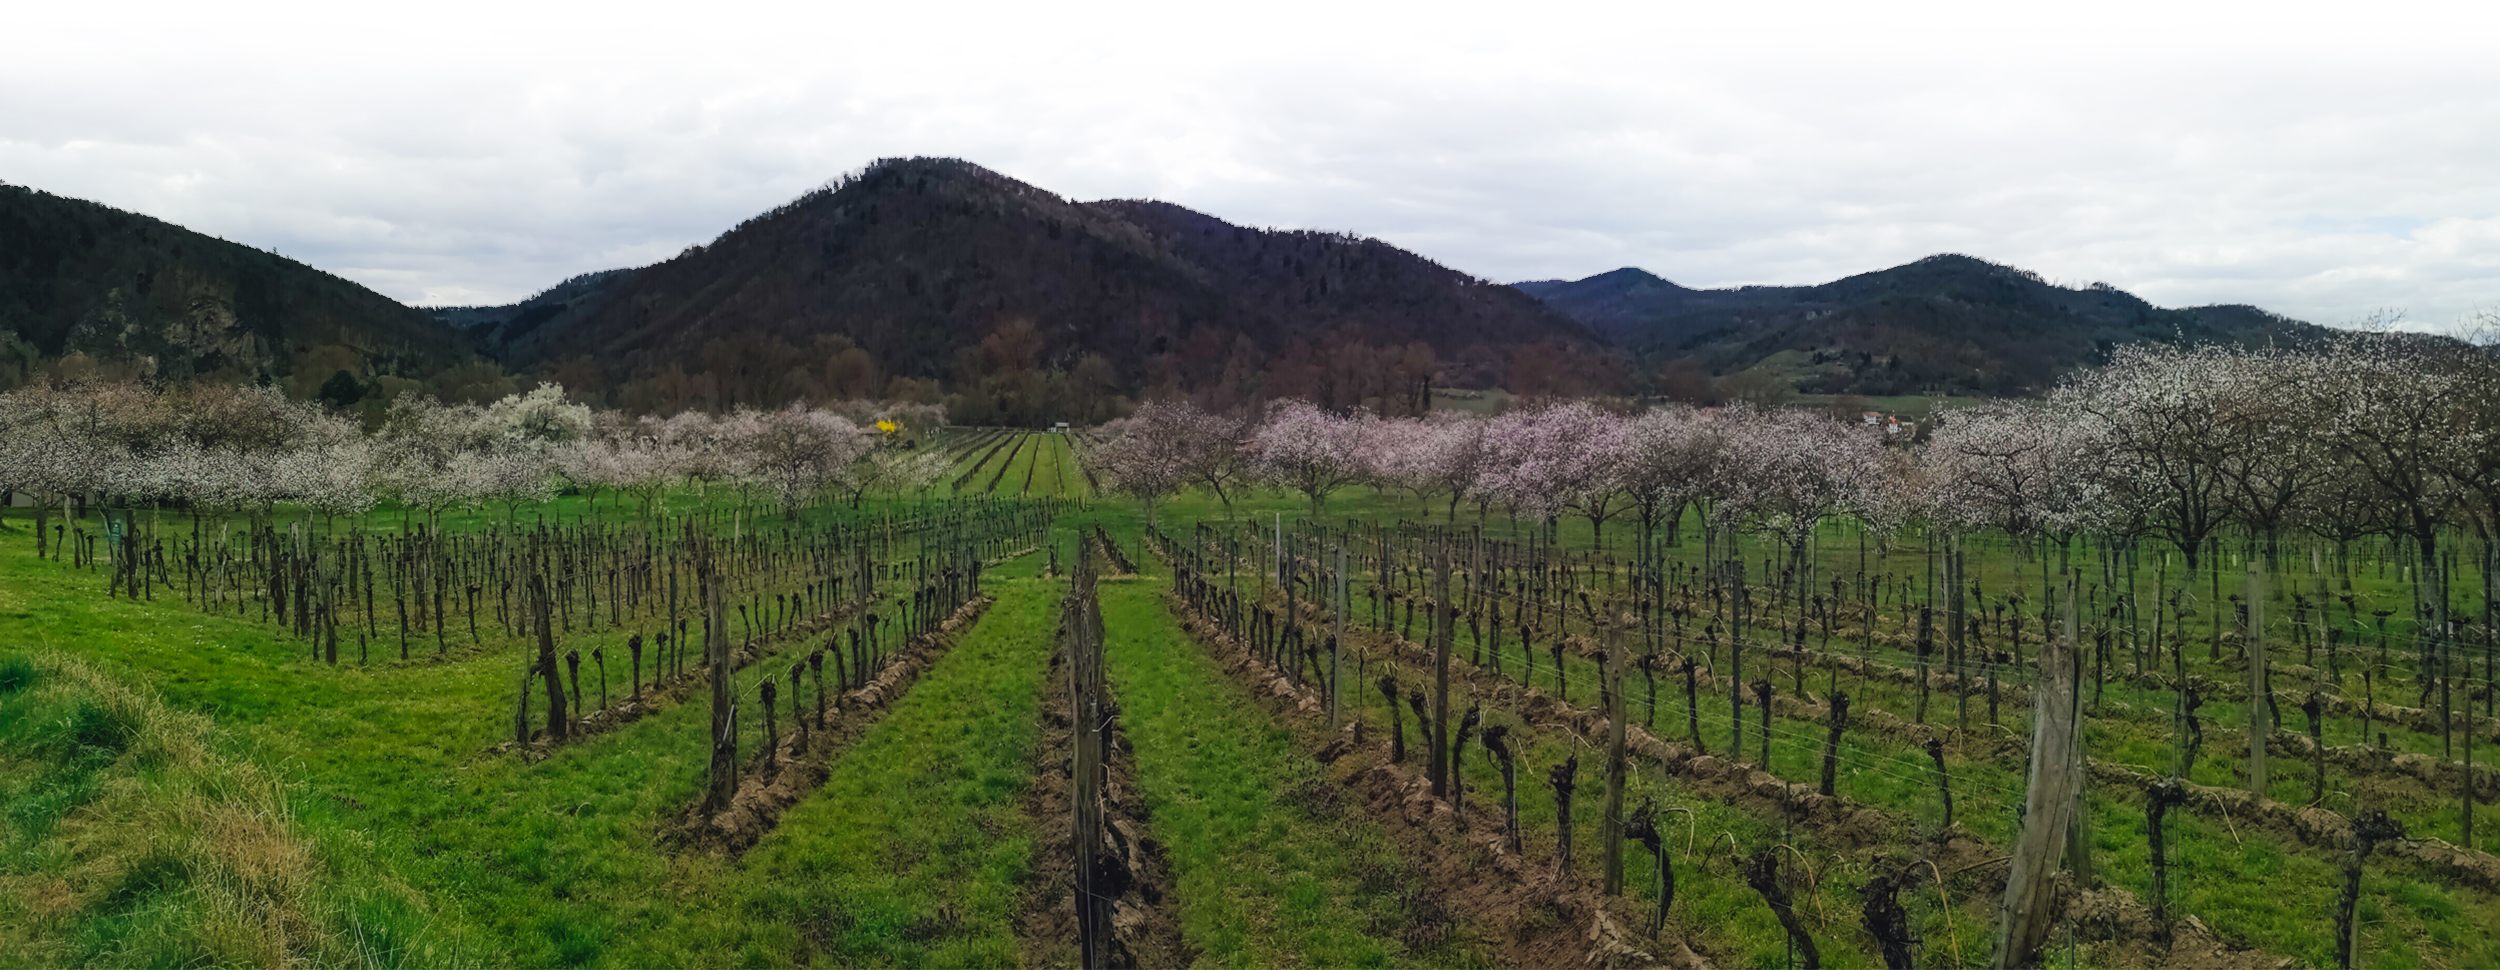 Apricots and vines in Wachau Valley, Austria